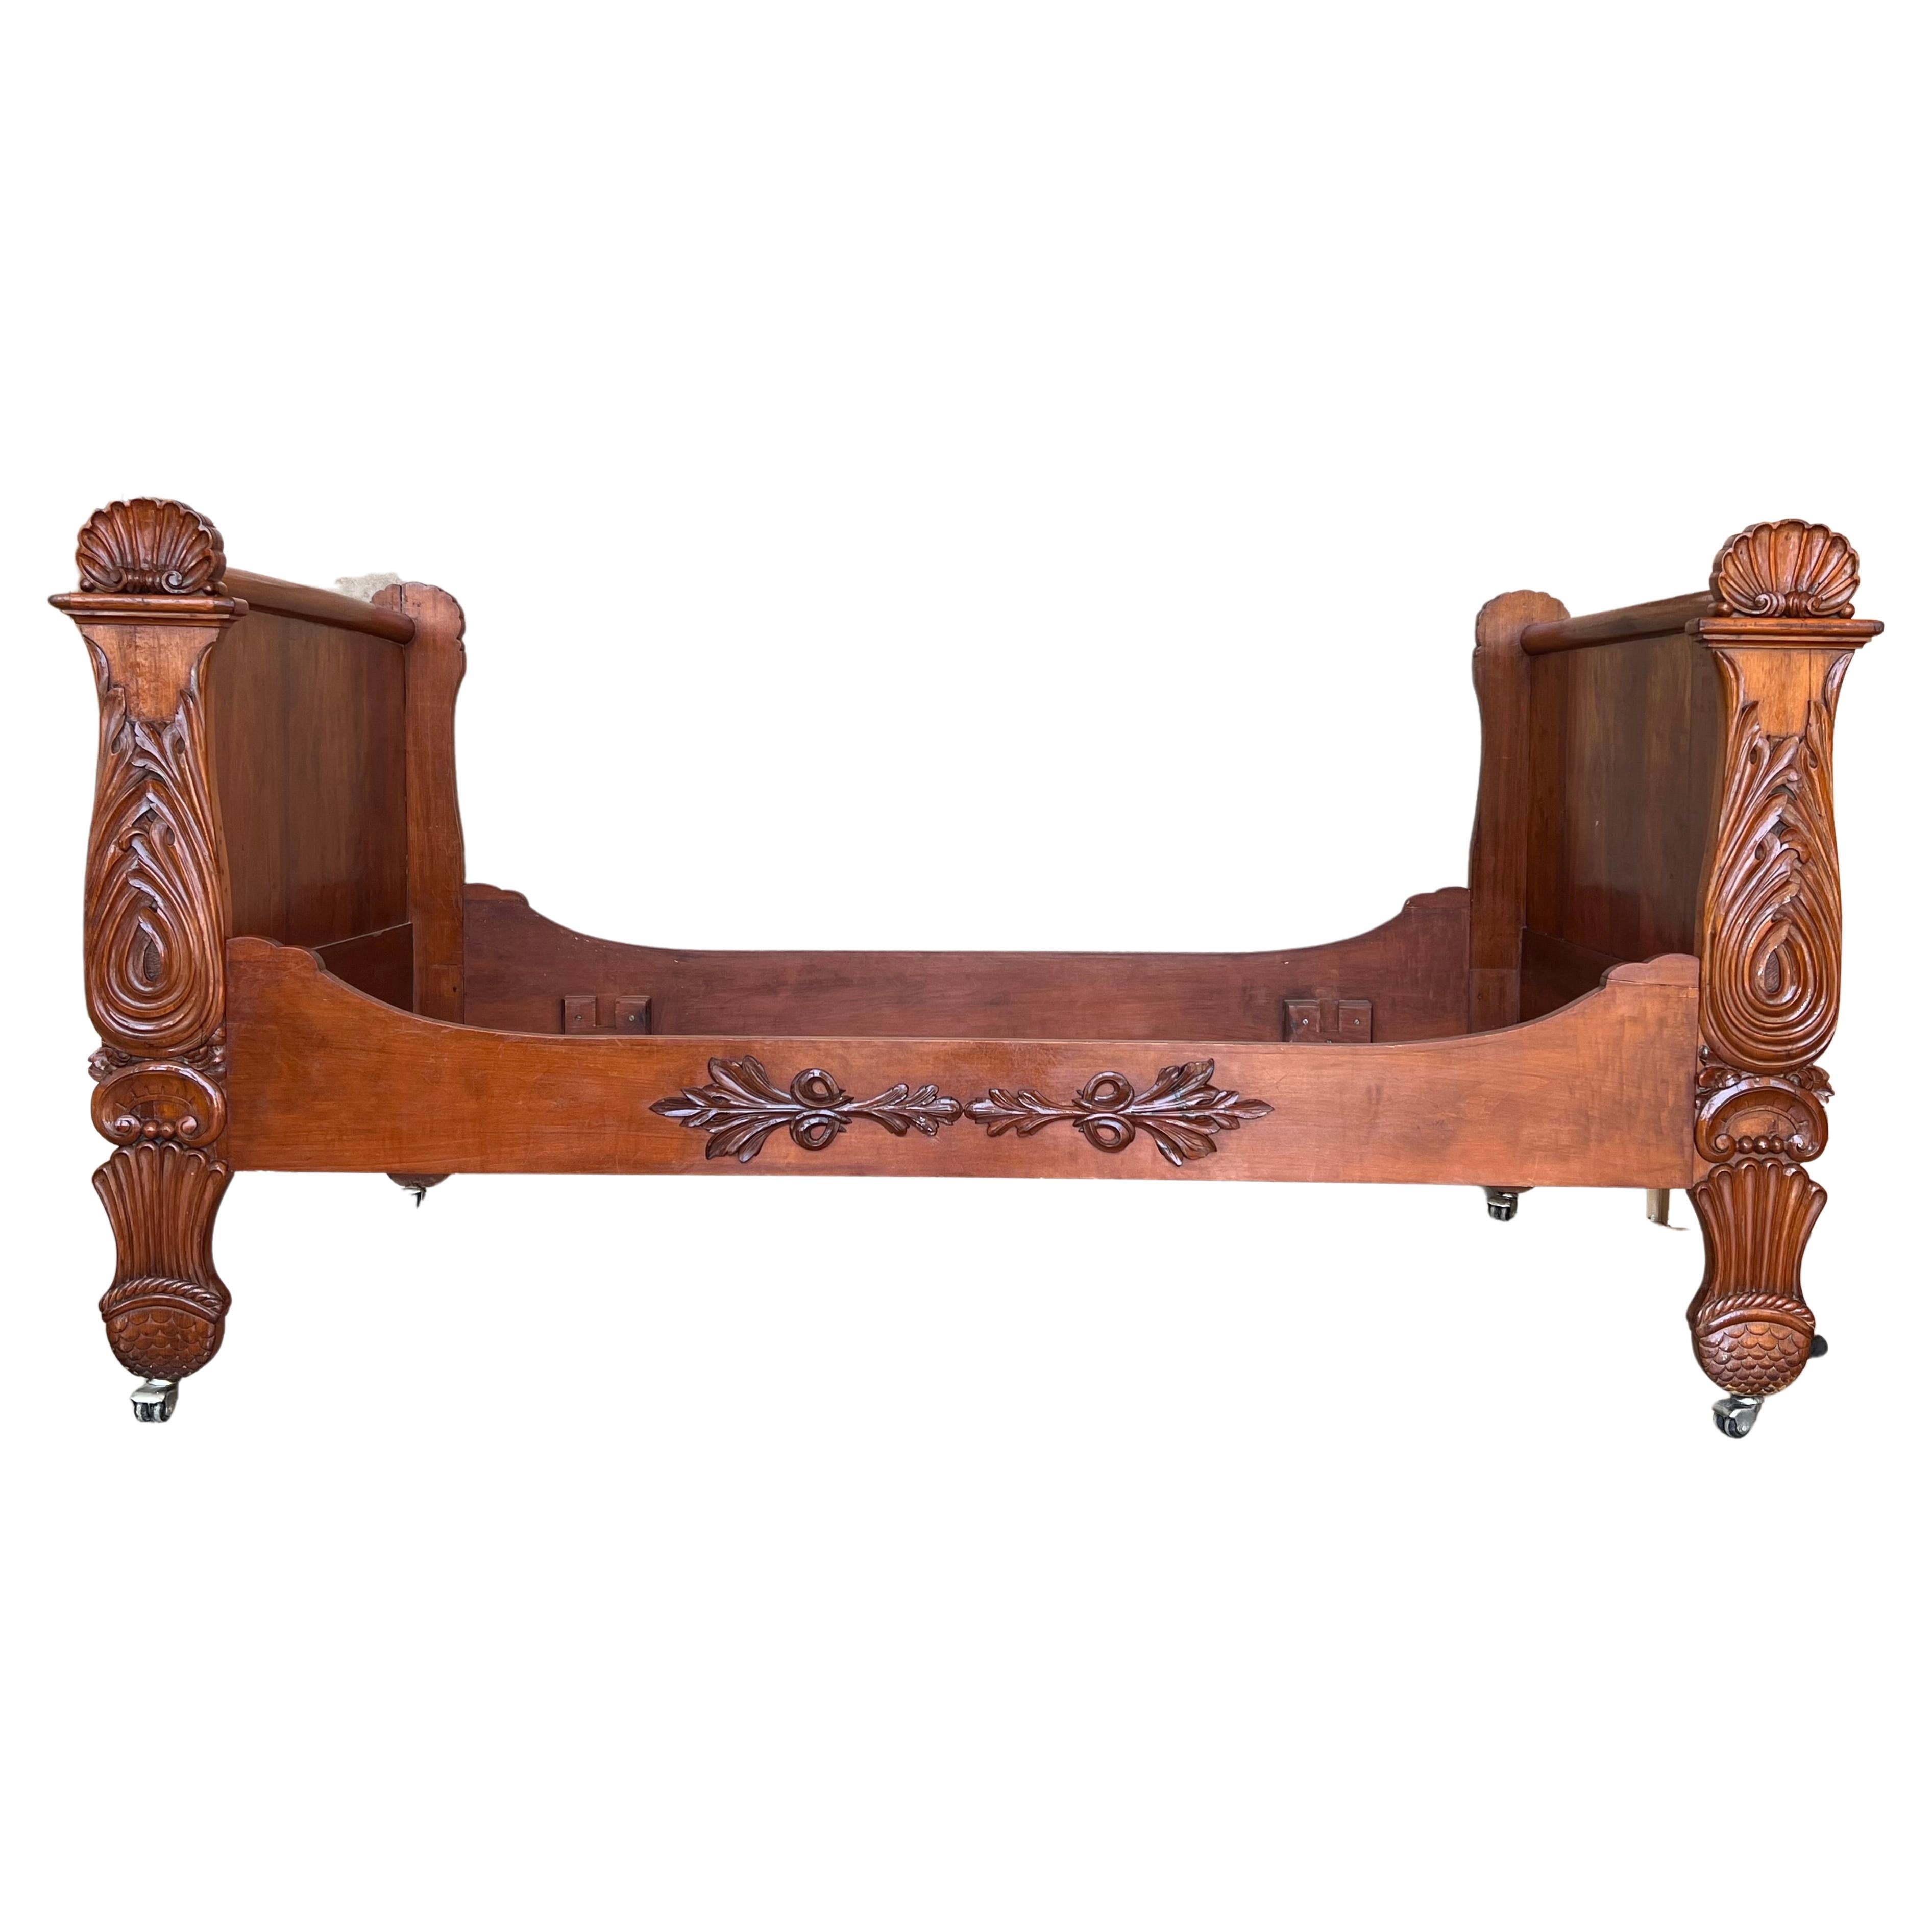 Single Carved Boat Bed Louis-Philippe in Mahogany, Circa 1840